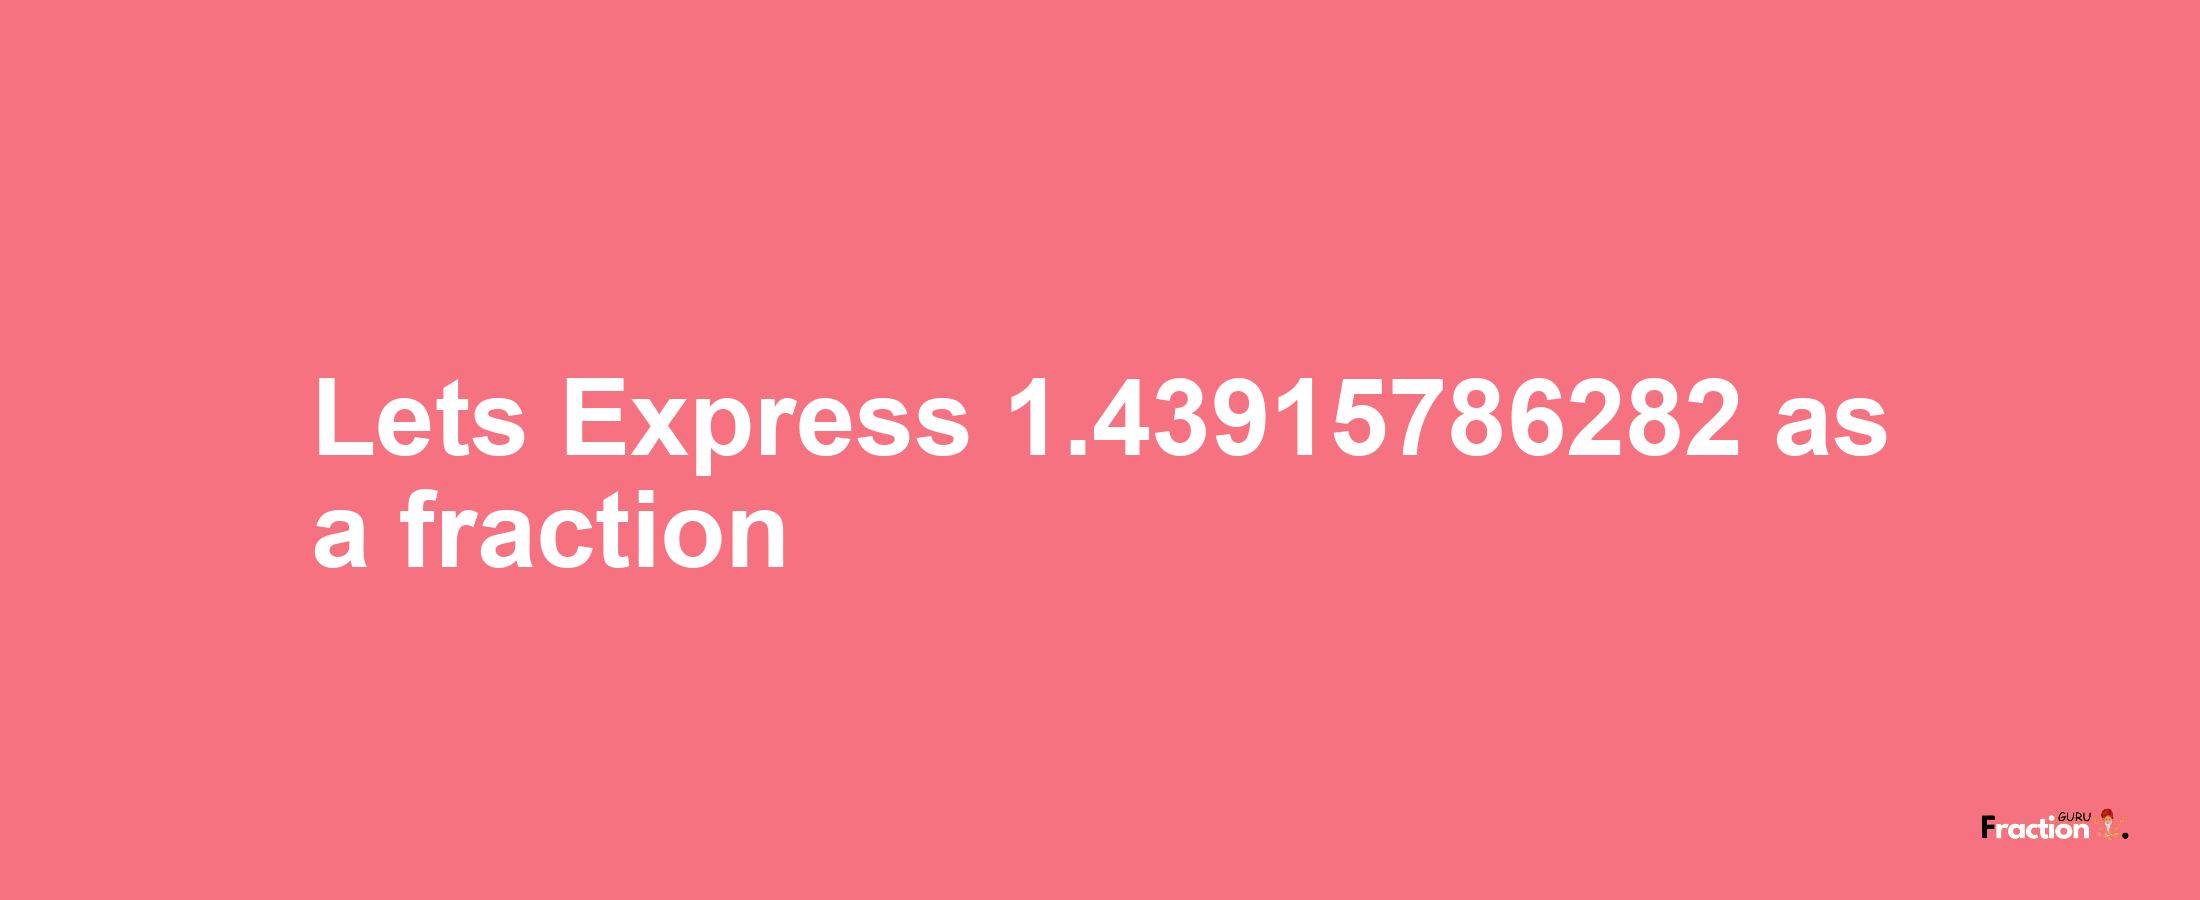 Lets Express 1.43915786282 as afraction